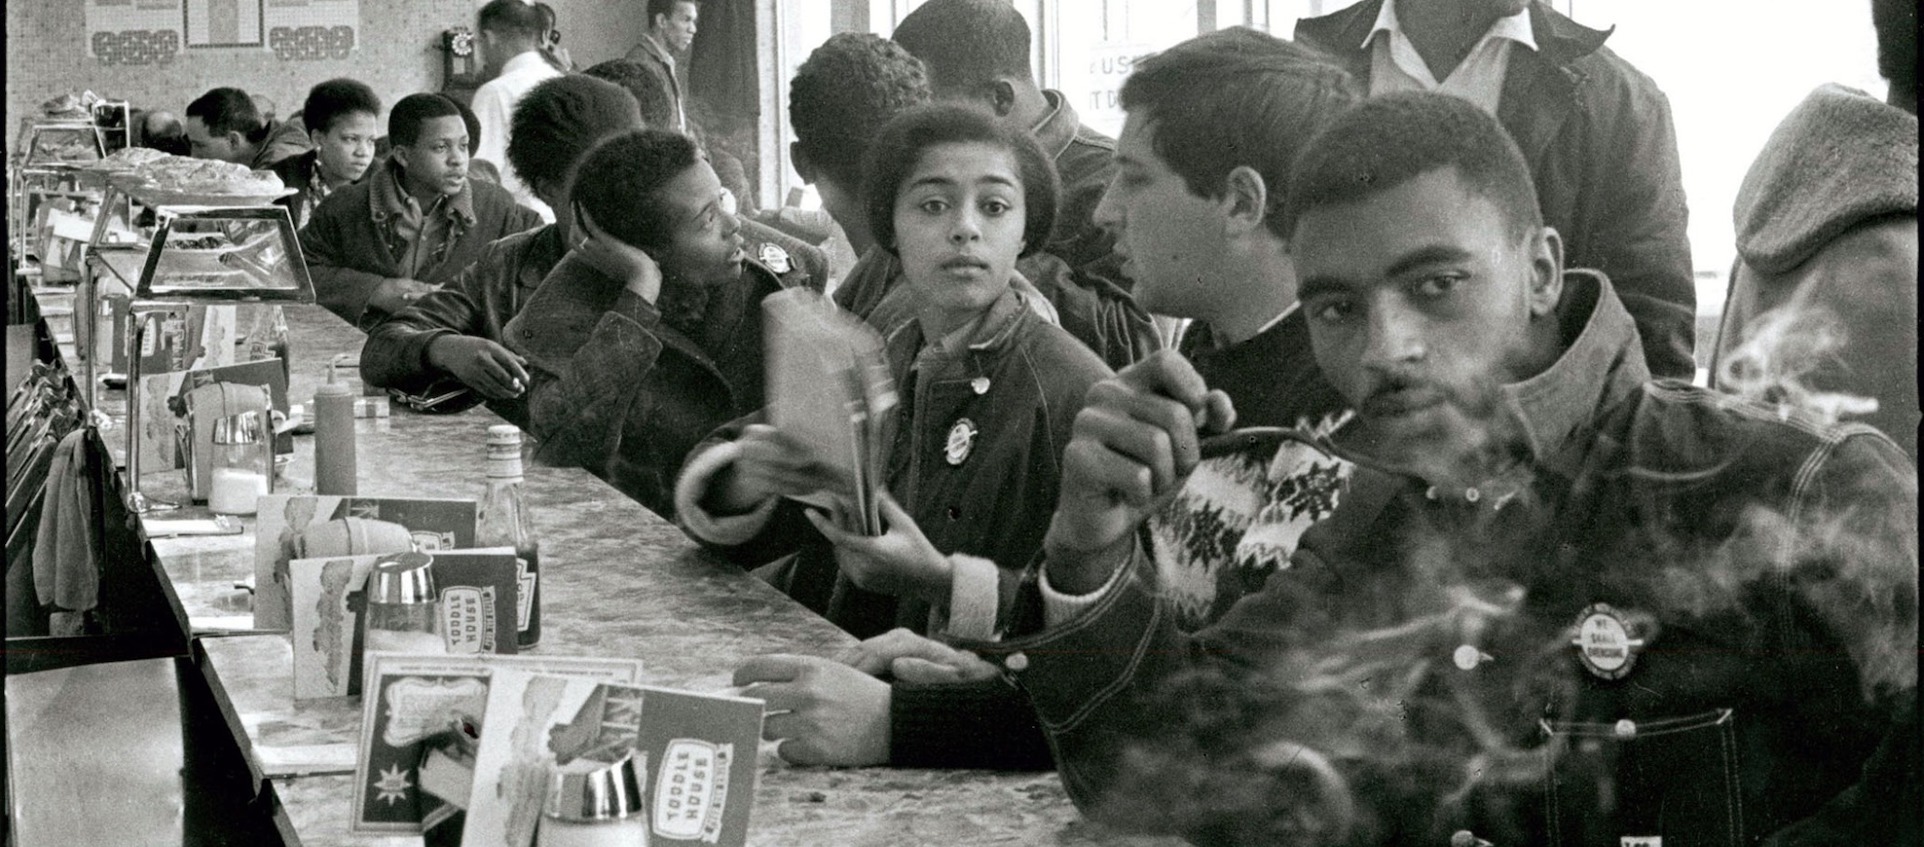 A black and white photo by Danny Lyon of Black men and women at a lunch counter